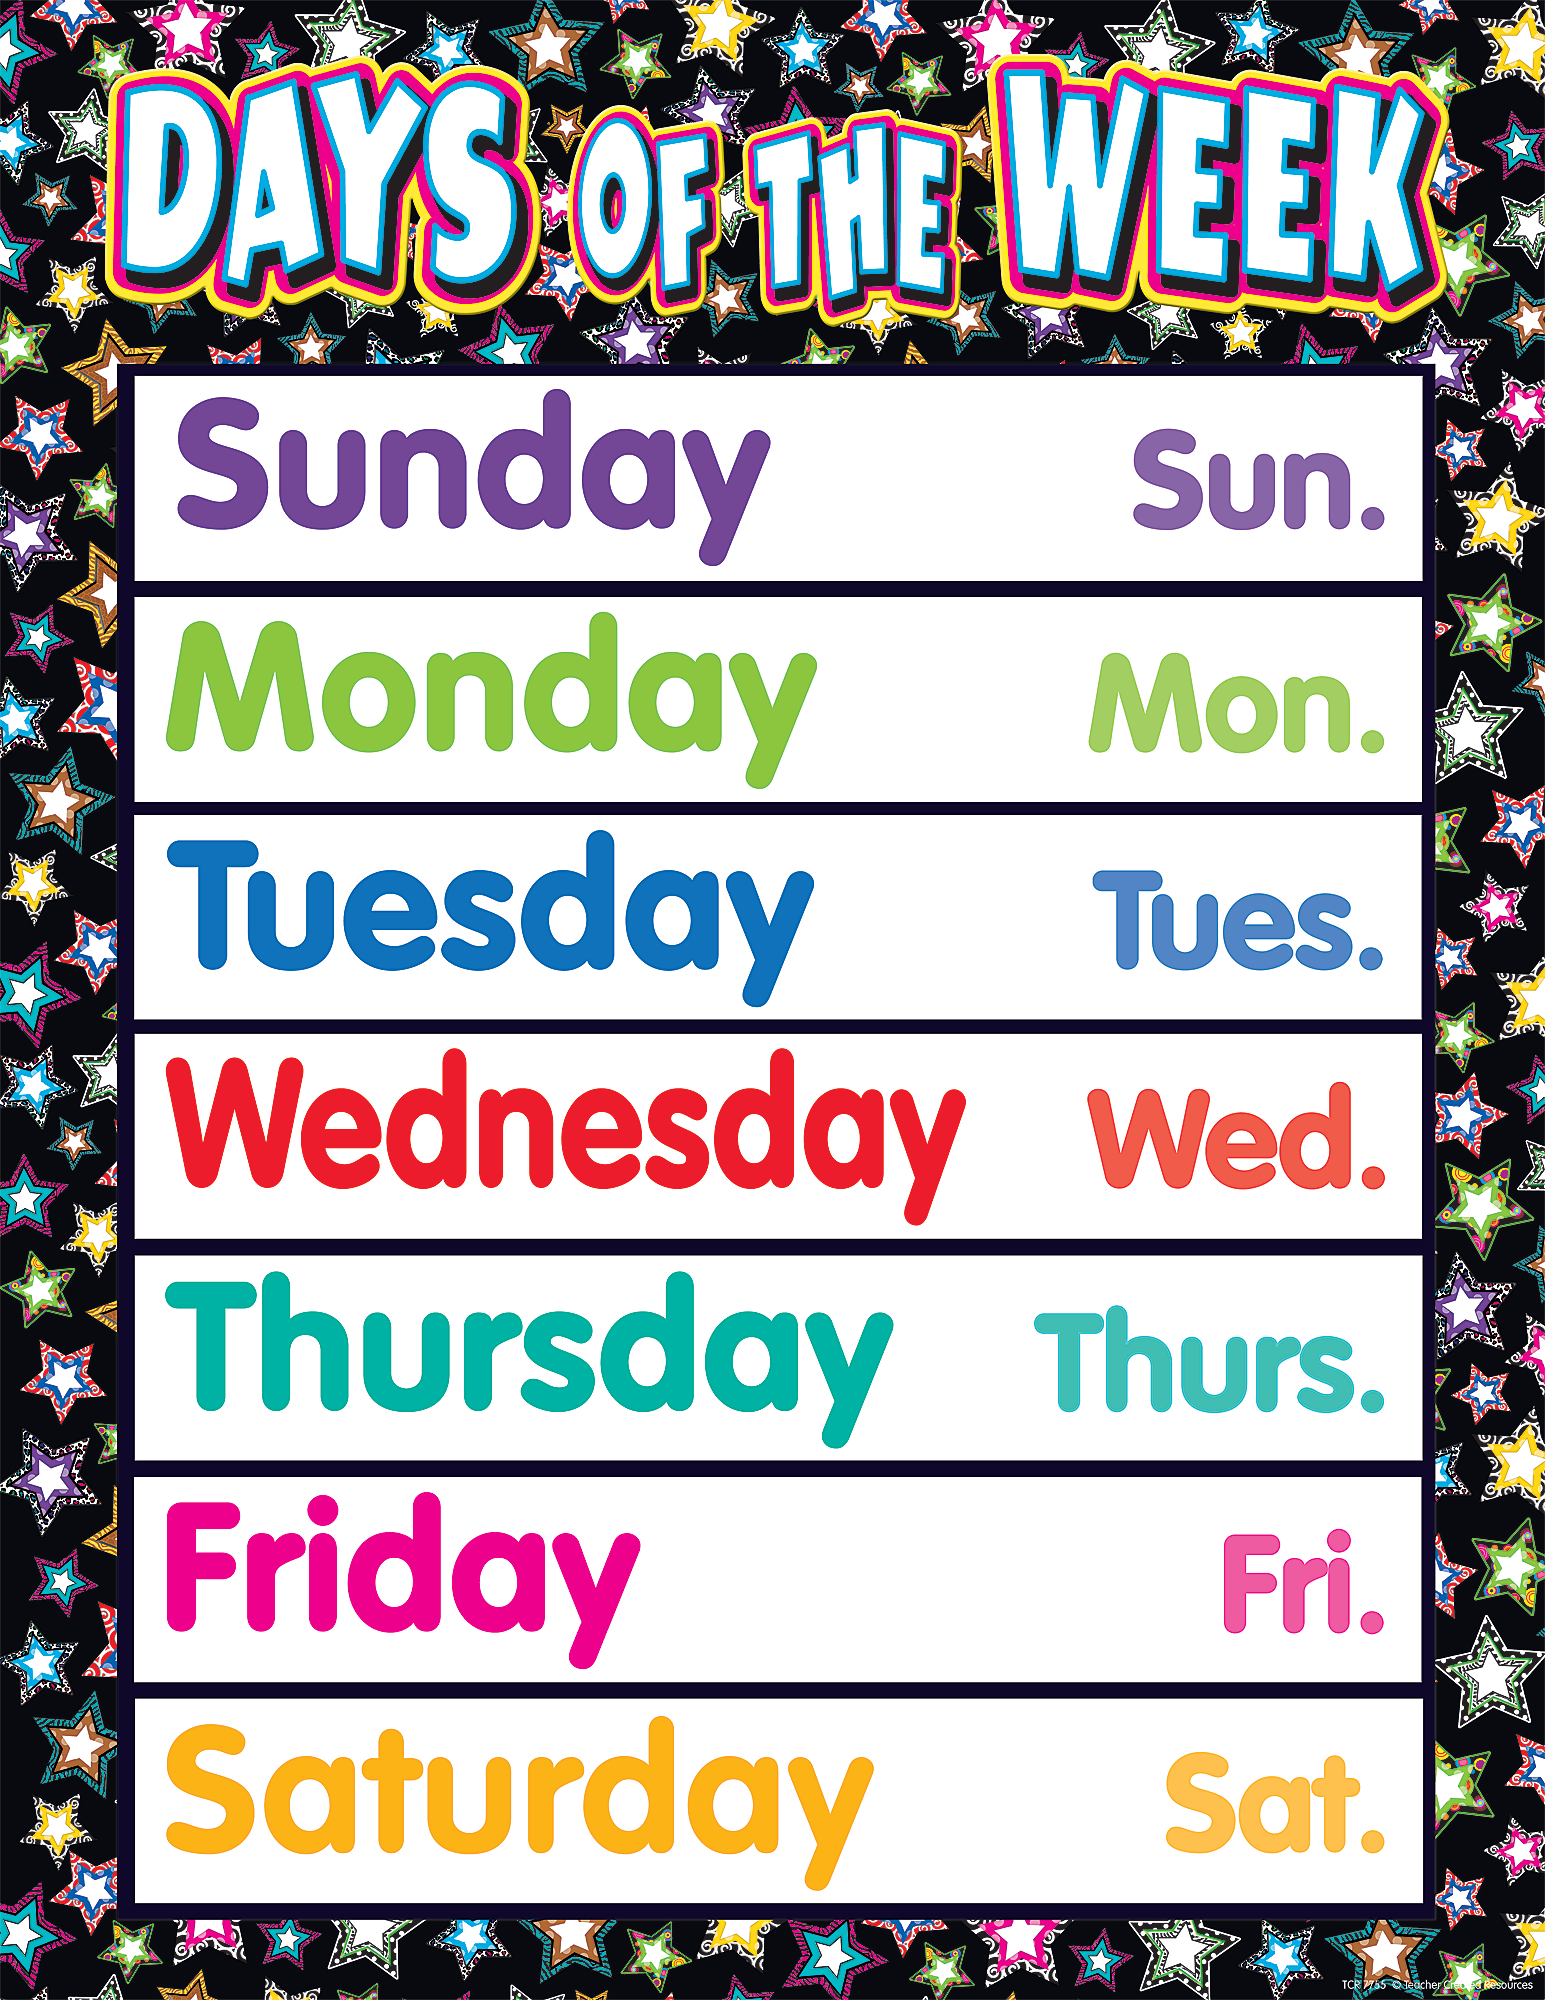 Days of the week. Days of the week картинки. Week Days name. Days of the week Chart.